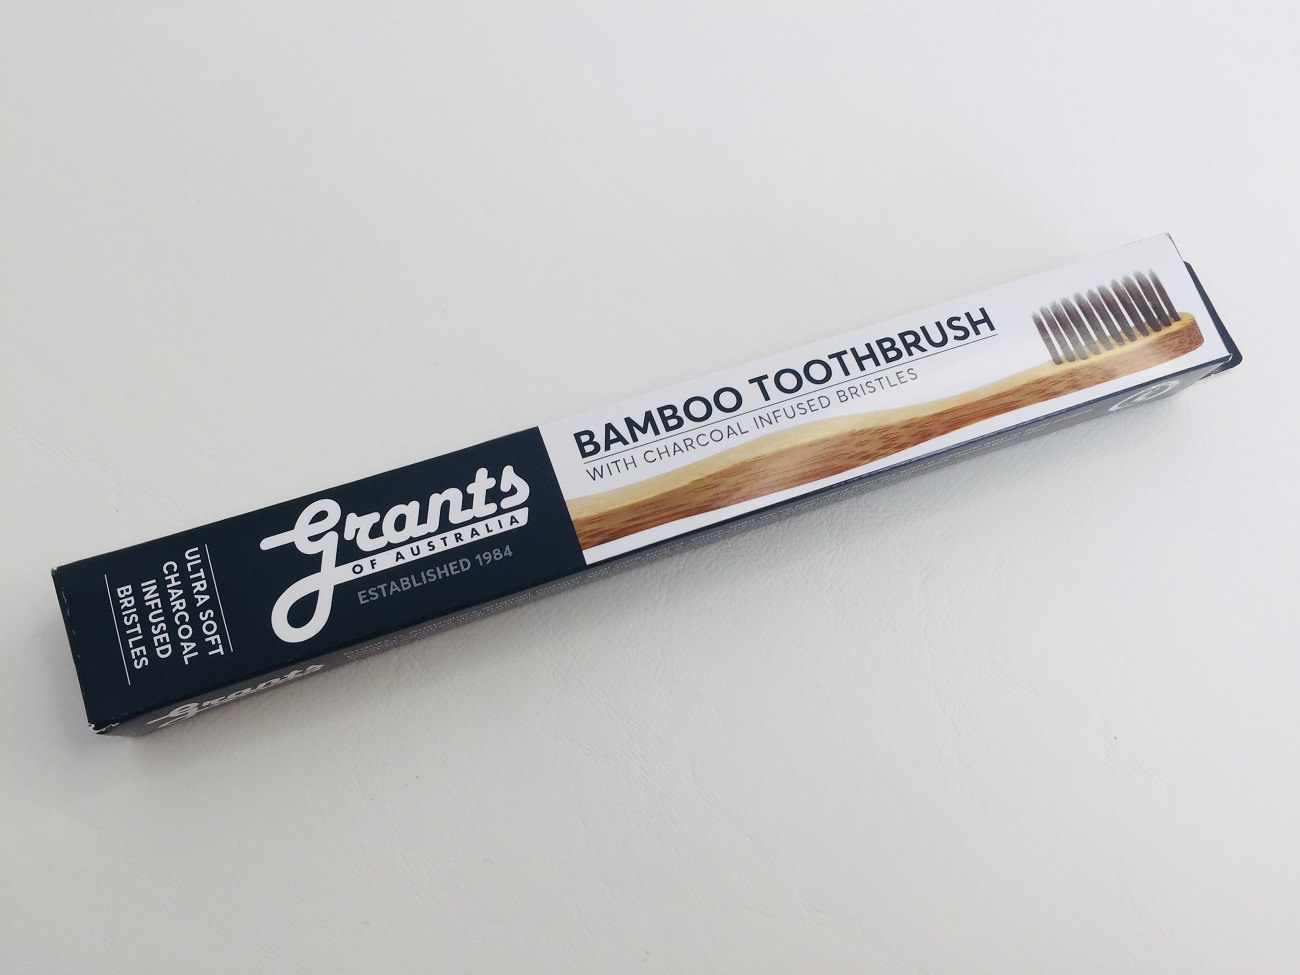 Grants Bamboo Toothbrush - Ultra Soft Charcoal Infused Bristles review feature imaged